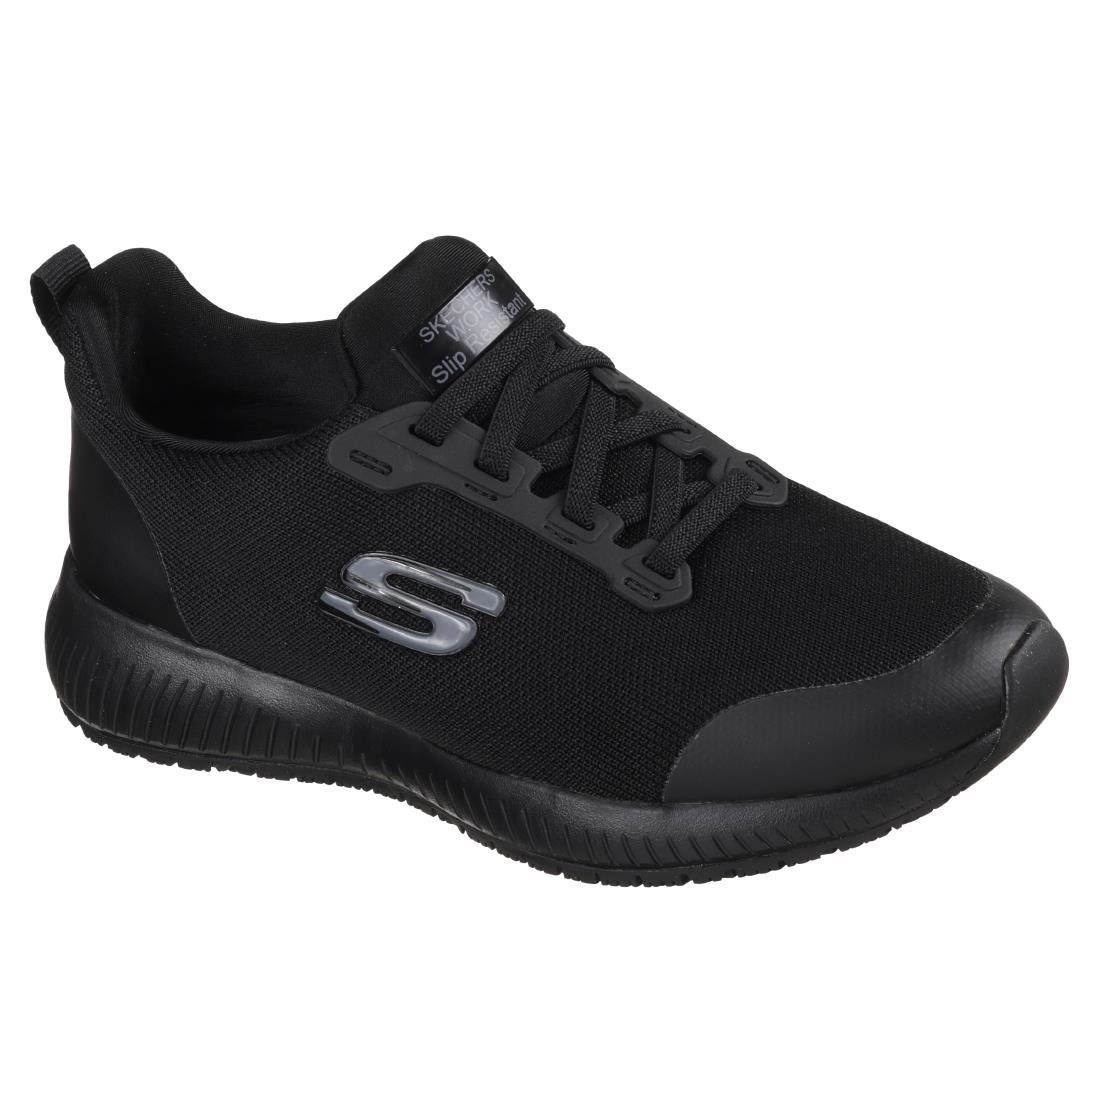 BB672-41 Skechers Womens Slip Resistant Squad Trainer Size 41 JD Catering Equipment Solutions Ltd